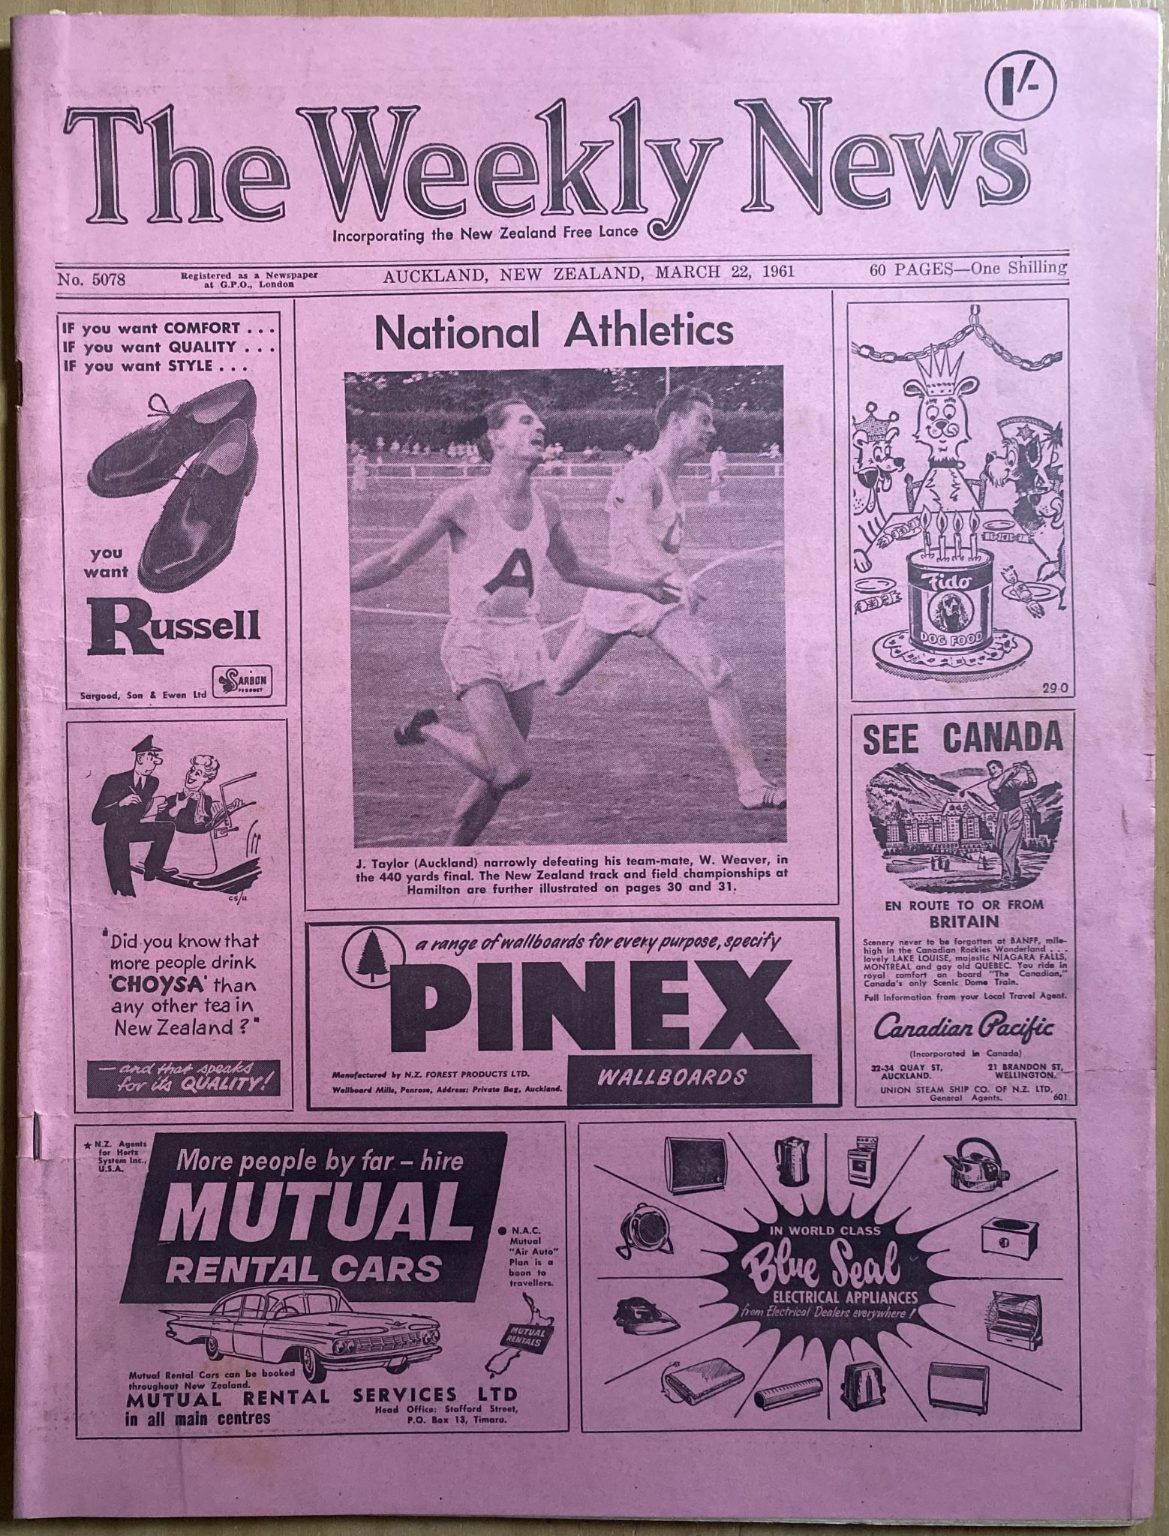 OLD NEWSPAPER: The Weekly News, No. 5078, 22 March 1961